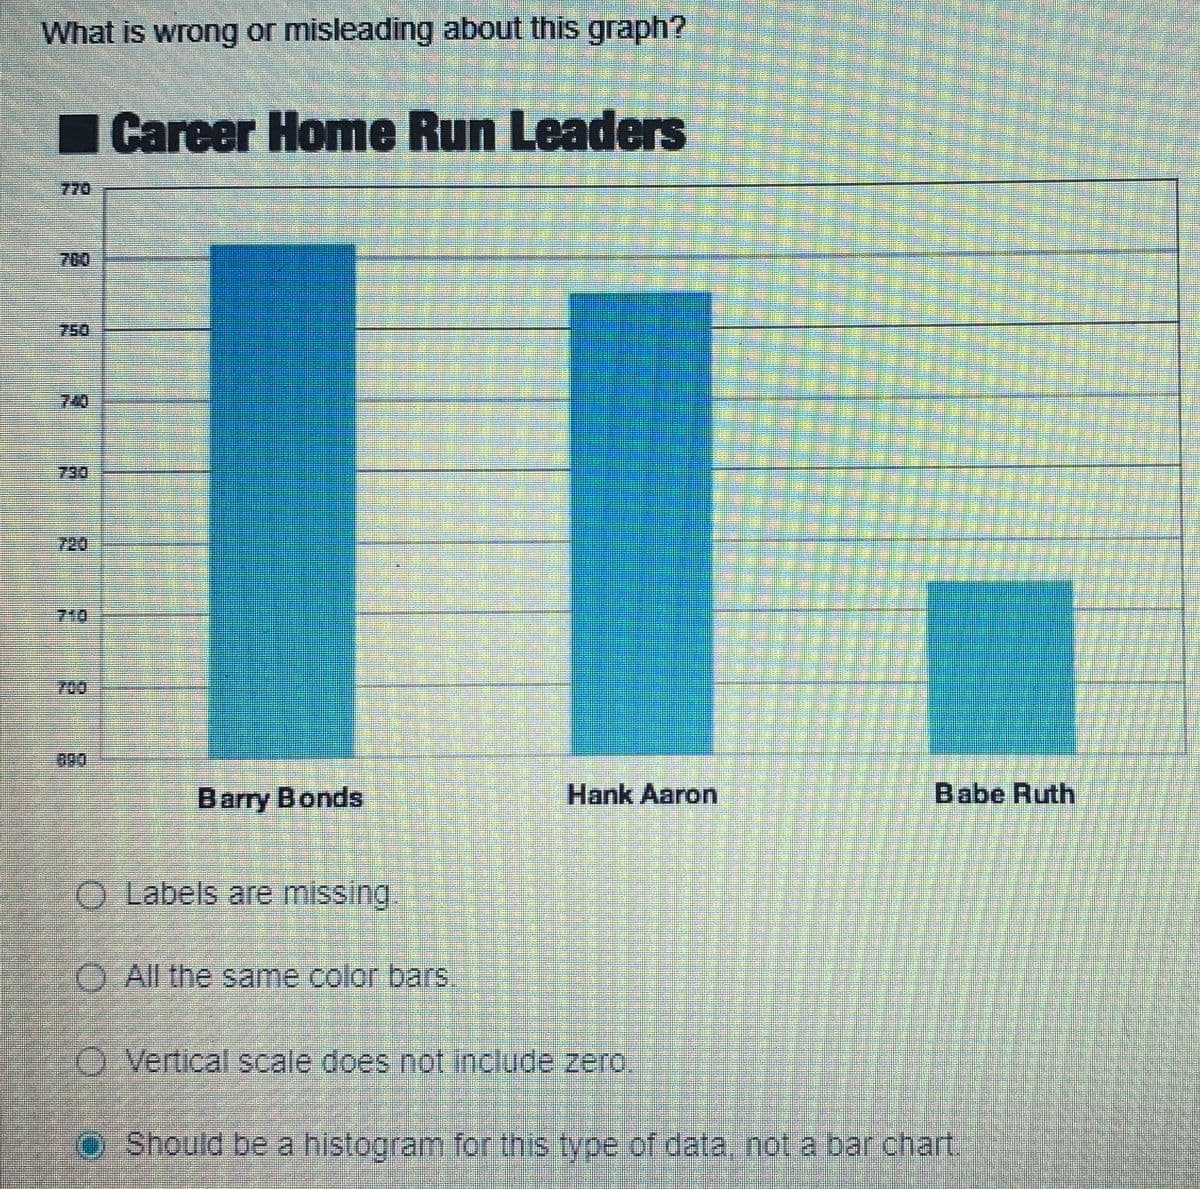 What is wrong or misleading about this graph?
Career Home Run Leaders
||
Barry Bonds
O Labels are missing
All the same color bars
Hank Aaron
Vertical scale does not include zero
16
Bab
Babe Ruth
O Should be a histogram for this type of data, not a bar chart.